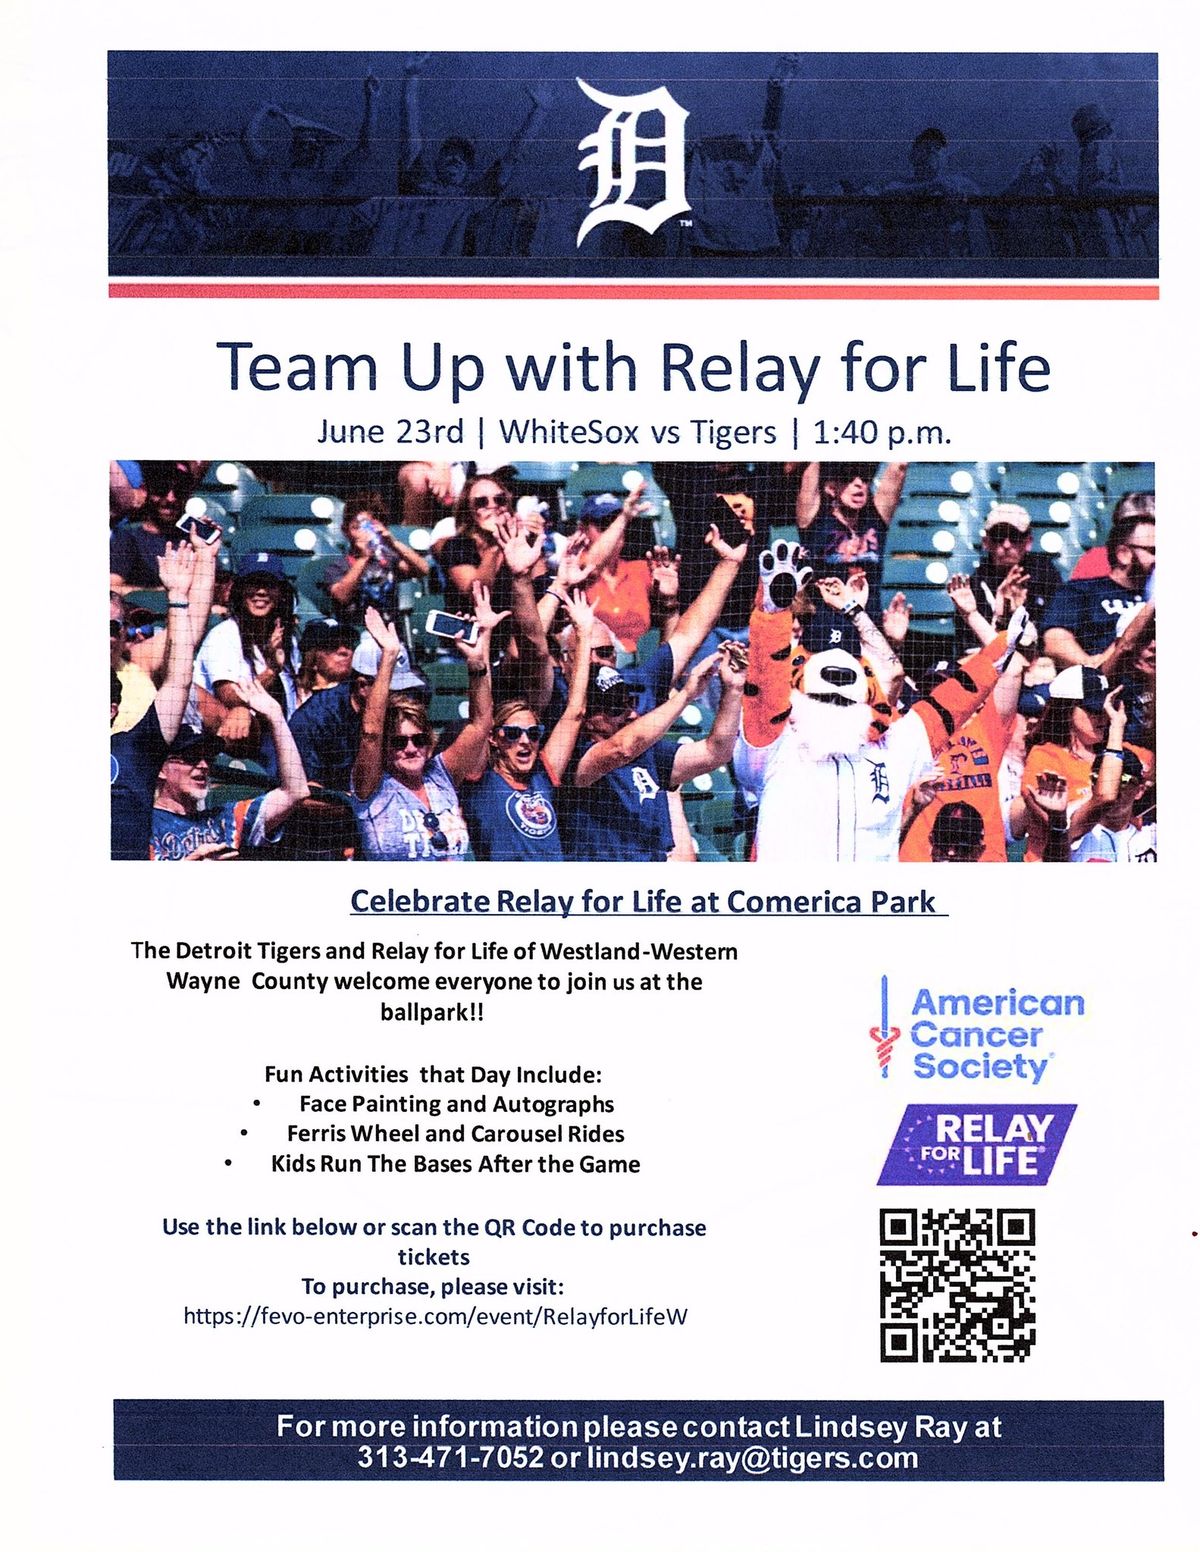 Relay Day at Comerica Park!